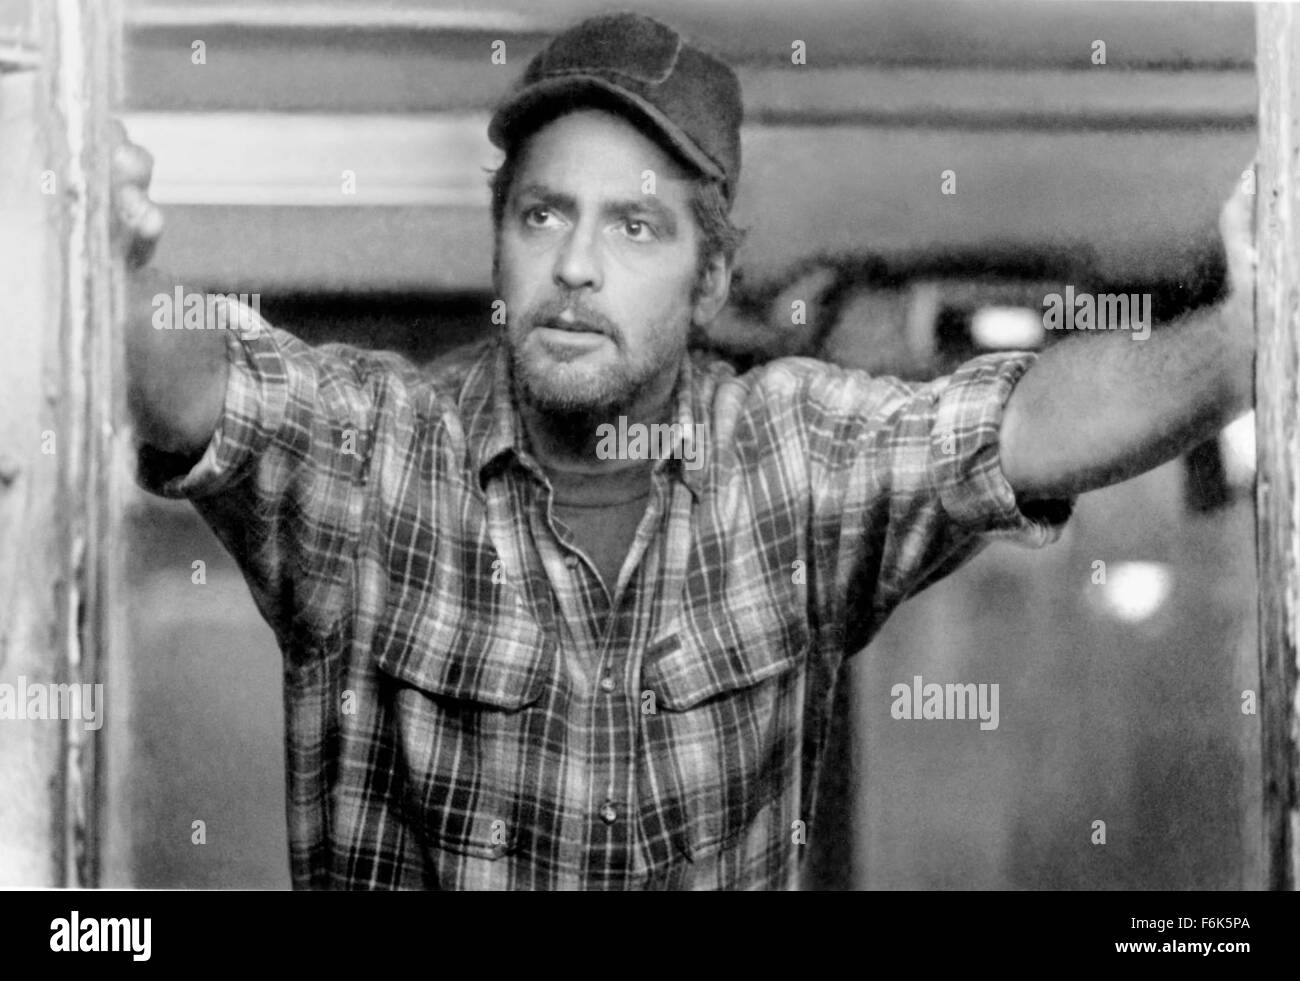 RELEASE DATE: June 30, 2000. MOVIE TITLE: The Perfect Storm. STUDIO: Warner Brothers Pictures. PLOT: An unusually intense storm pattern catches some commercial fishermen unaware and puts them in mortal danger. PICTURED: GEORGE CLOONEY as Captain Billy Tyne. Stock Photo